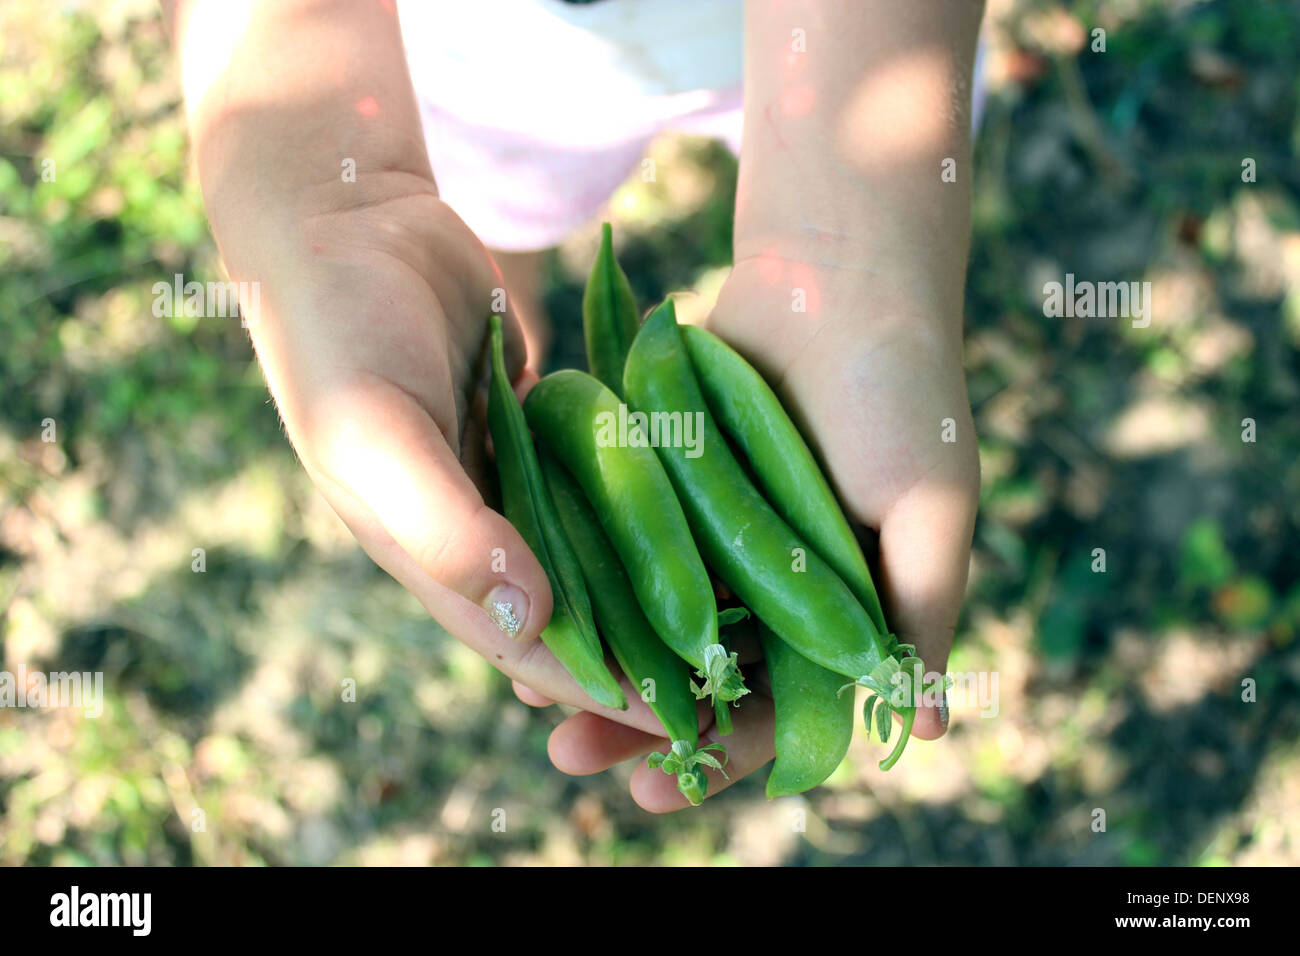 green pea pod laying on the palms Stock Photo